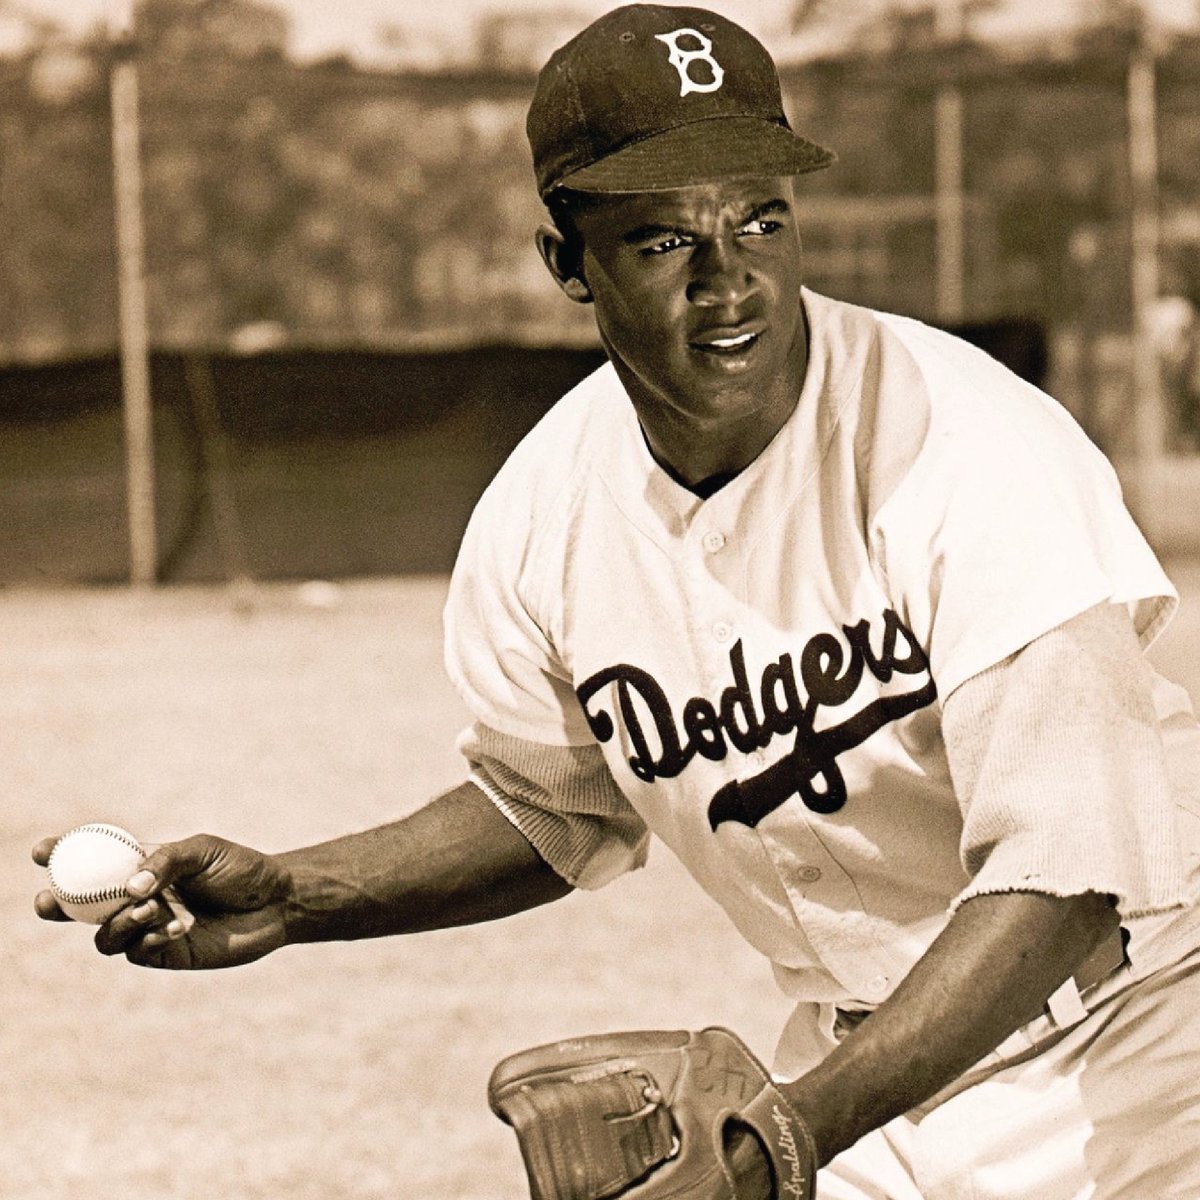 Jackie Robinson broke the color barrier for Black Americans on the baseball field and dedicated his life to advancing progress. On the 77th anniversary of his @MLB debut, we reflect on his remarkable legacy and the enduring impact of his activism. Happy #JackieRobinsonDay!